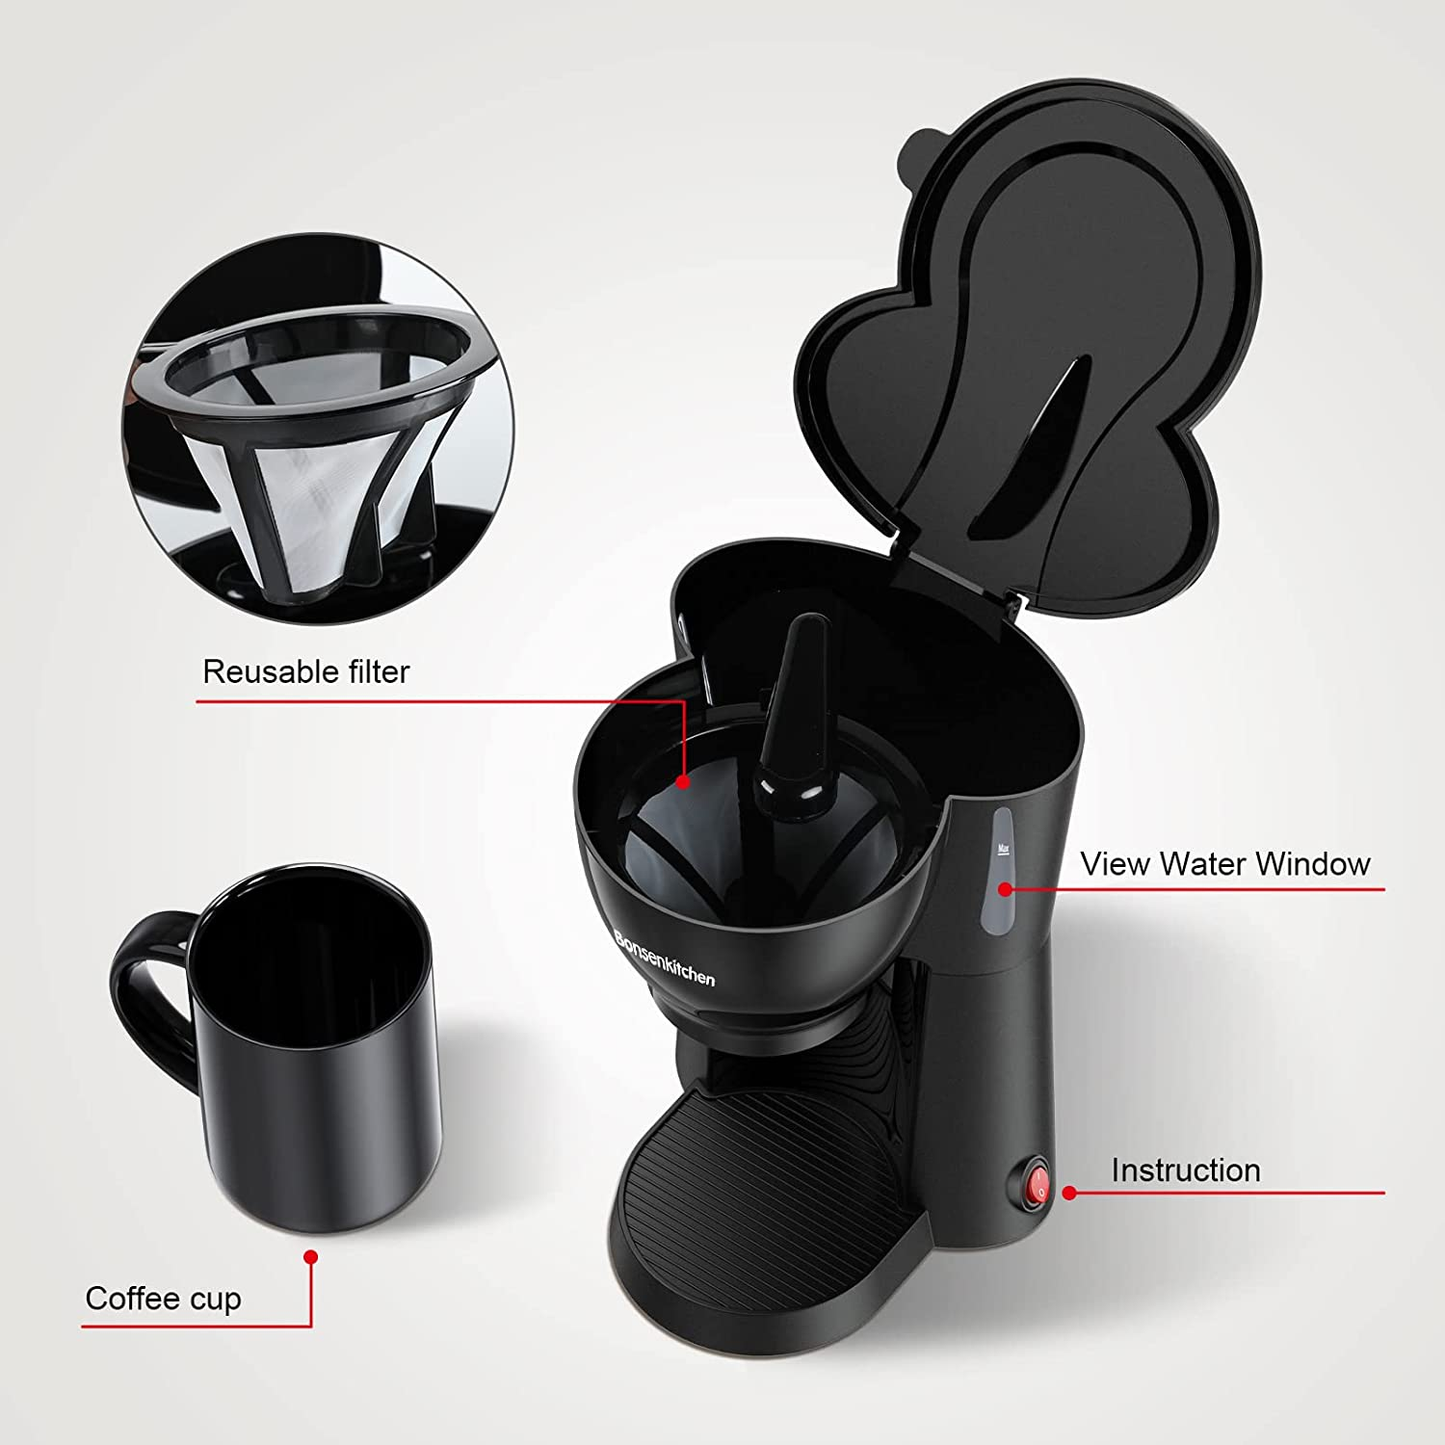 Bonsenkitchen Mini Coffee Maker with Ceramics Mug, Compact One Cup Drip Coffee Machine with Durable Reusable Filter, Portable Coffee Brewer for Home and Office